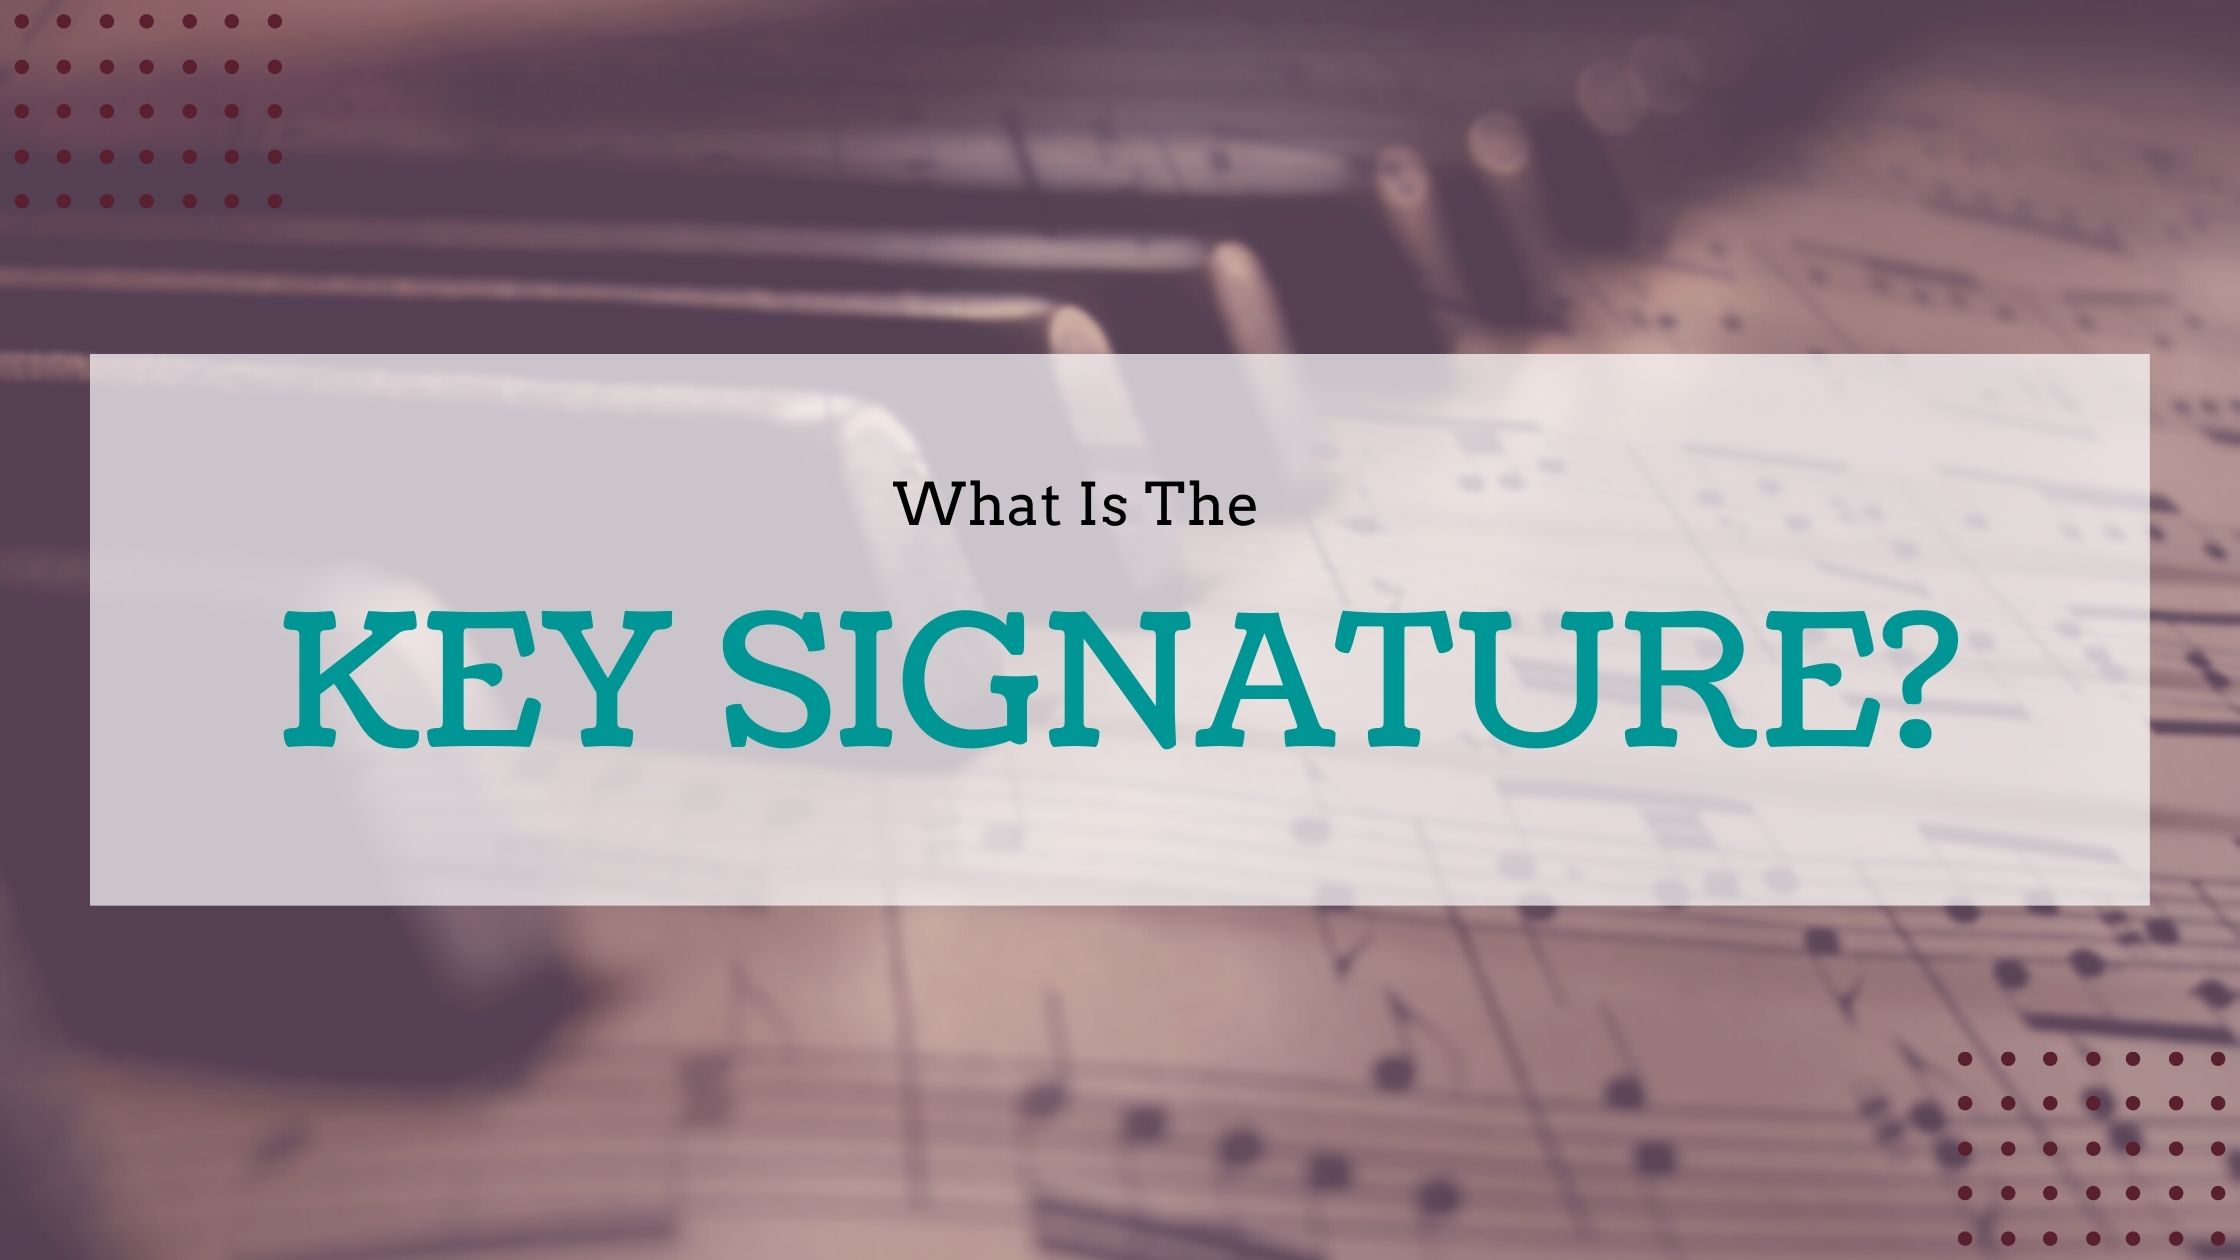 Take the minor key signatures quiz and see if you can correctly guess the sharps or flats in the minor keys. Ready? Let's go!